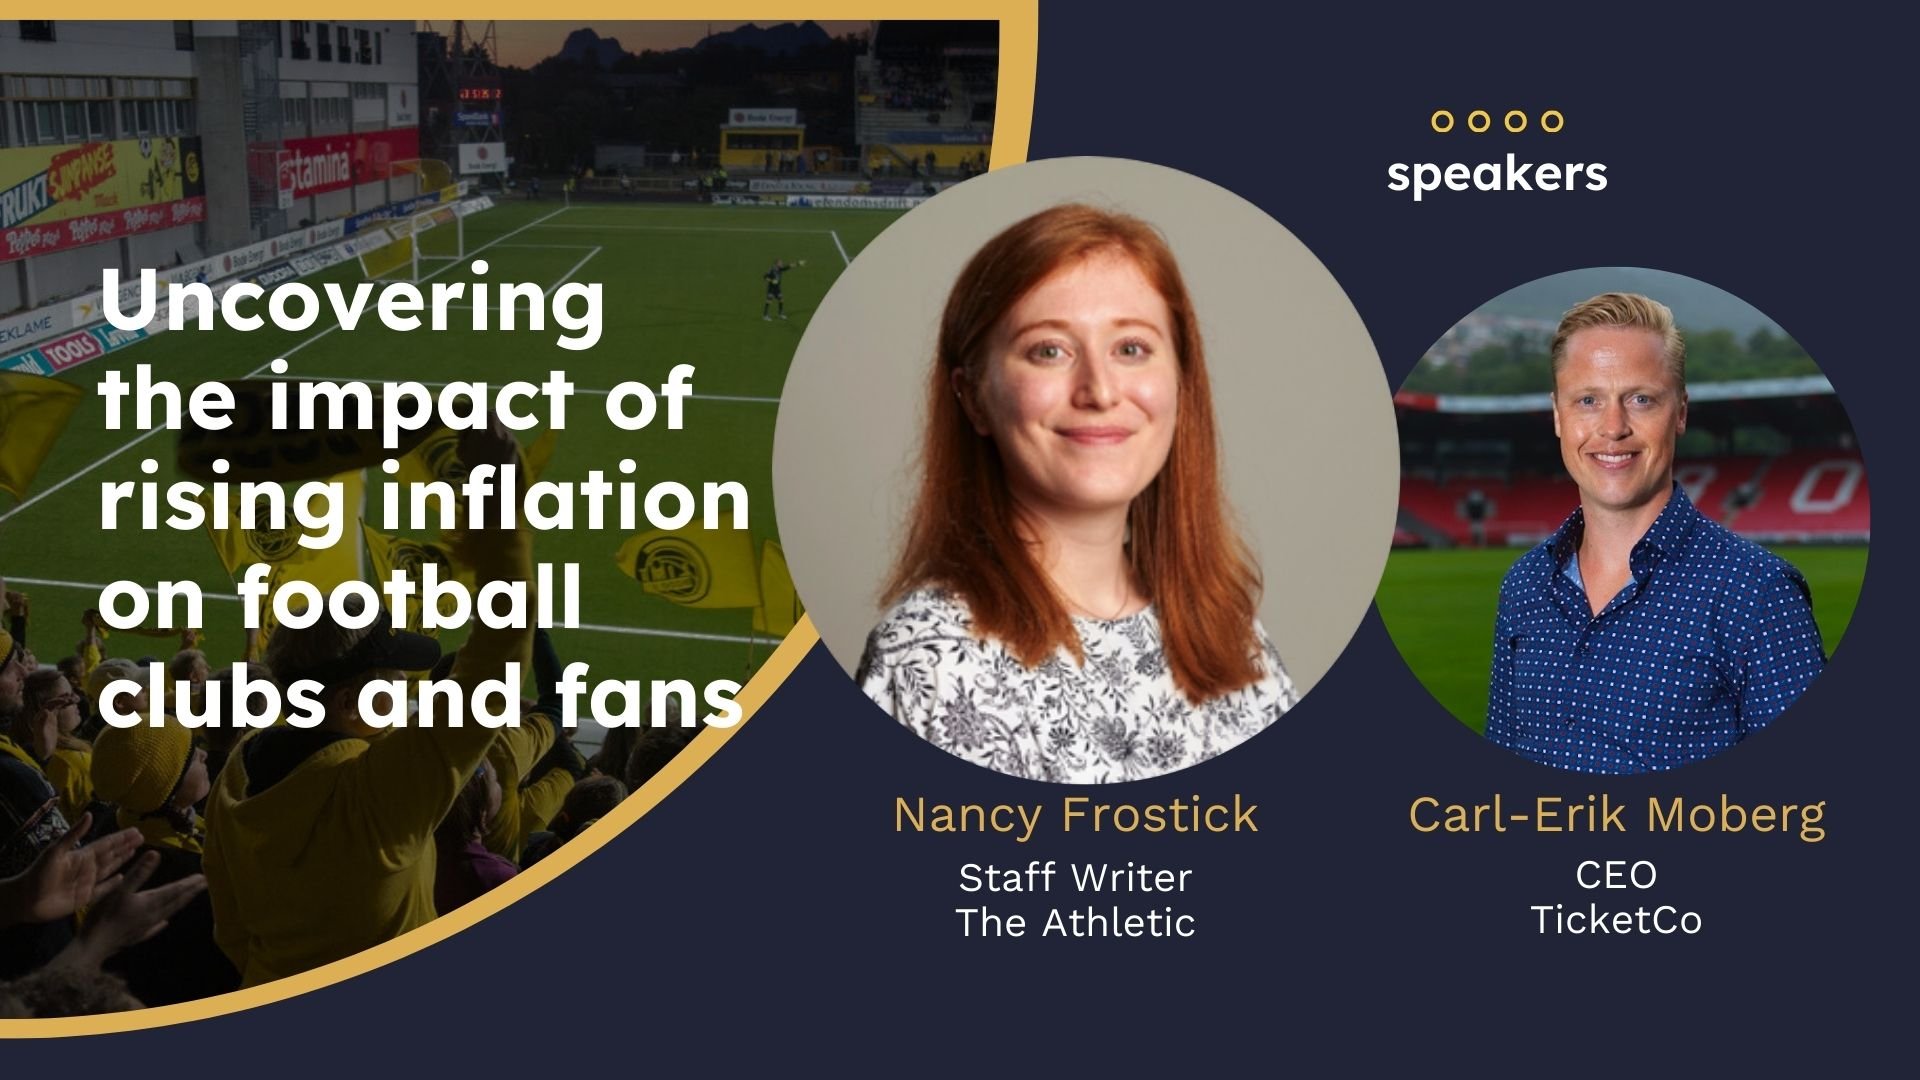 1. Uncovering the impact of rising inflation on football clubs and fans